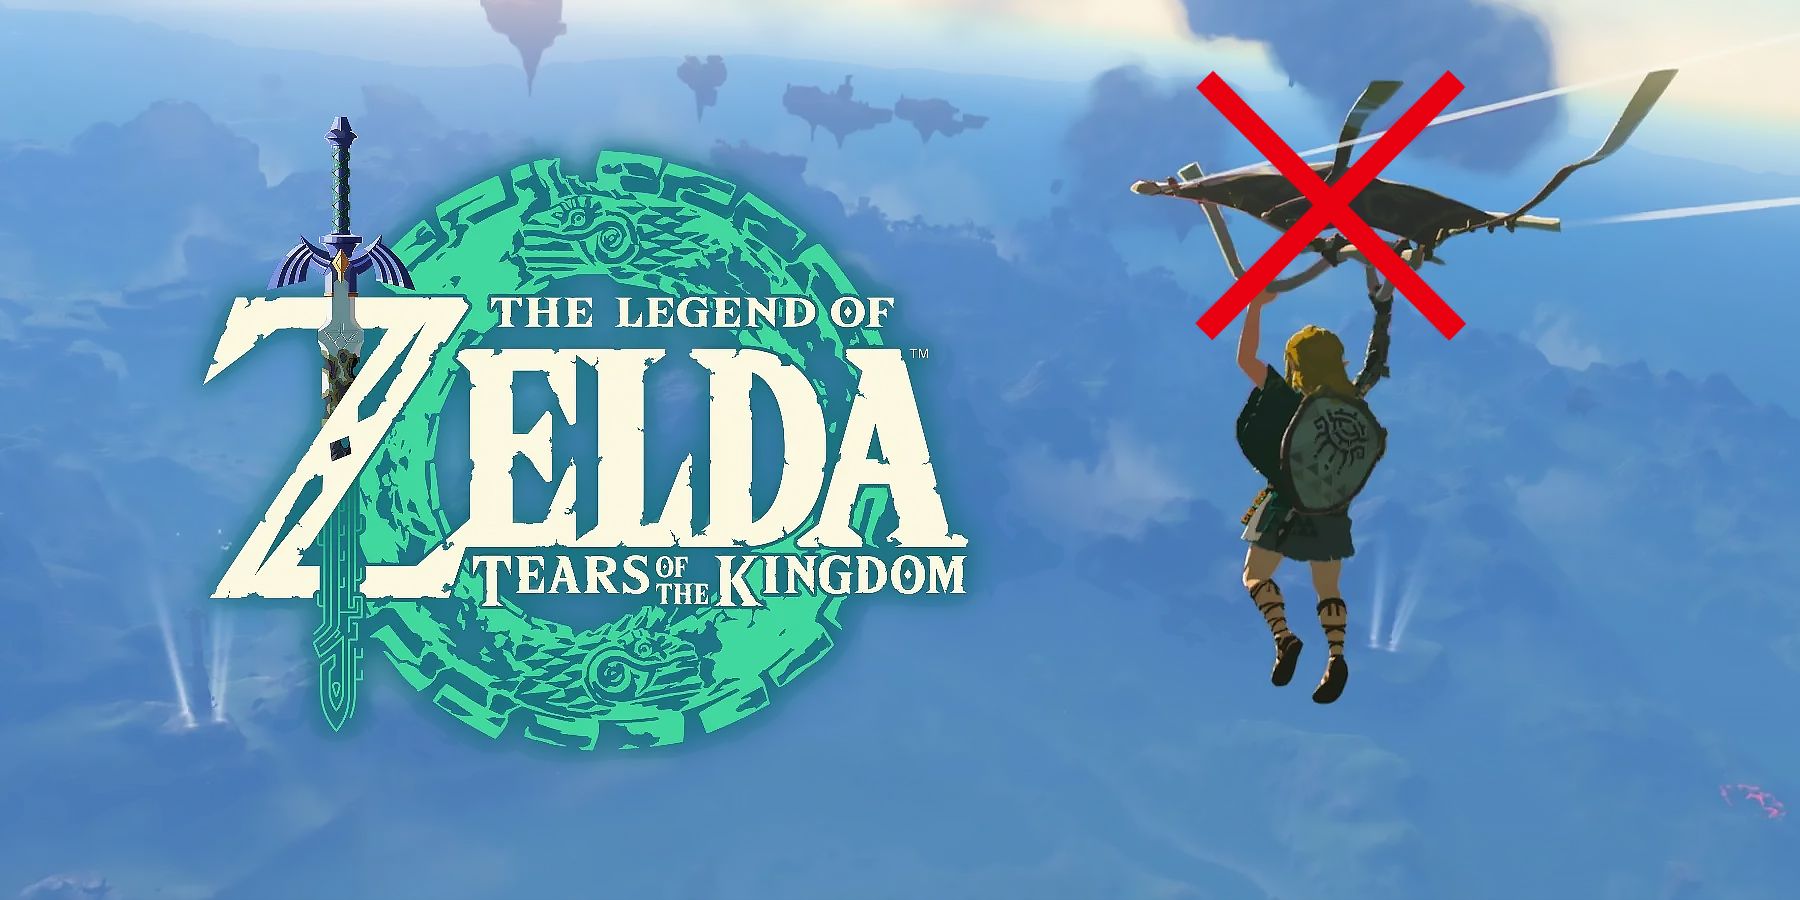 The Legend of Zelda Tears of the Kingdom TOTK Link with crossed out paraglider